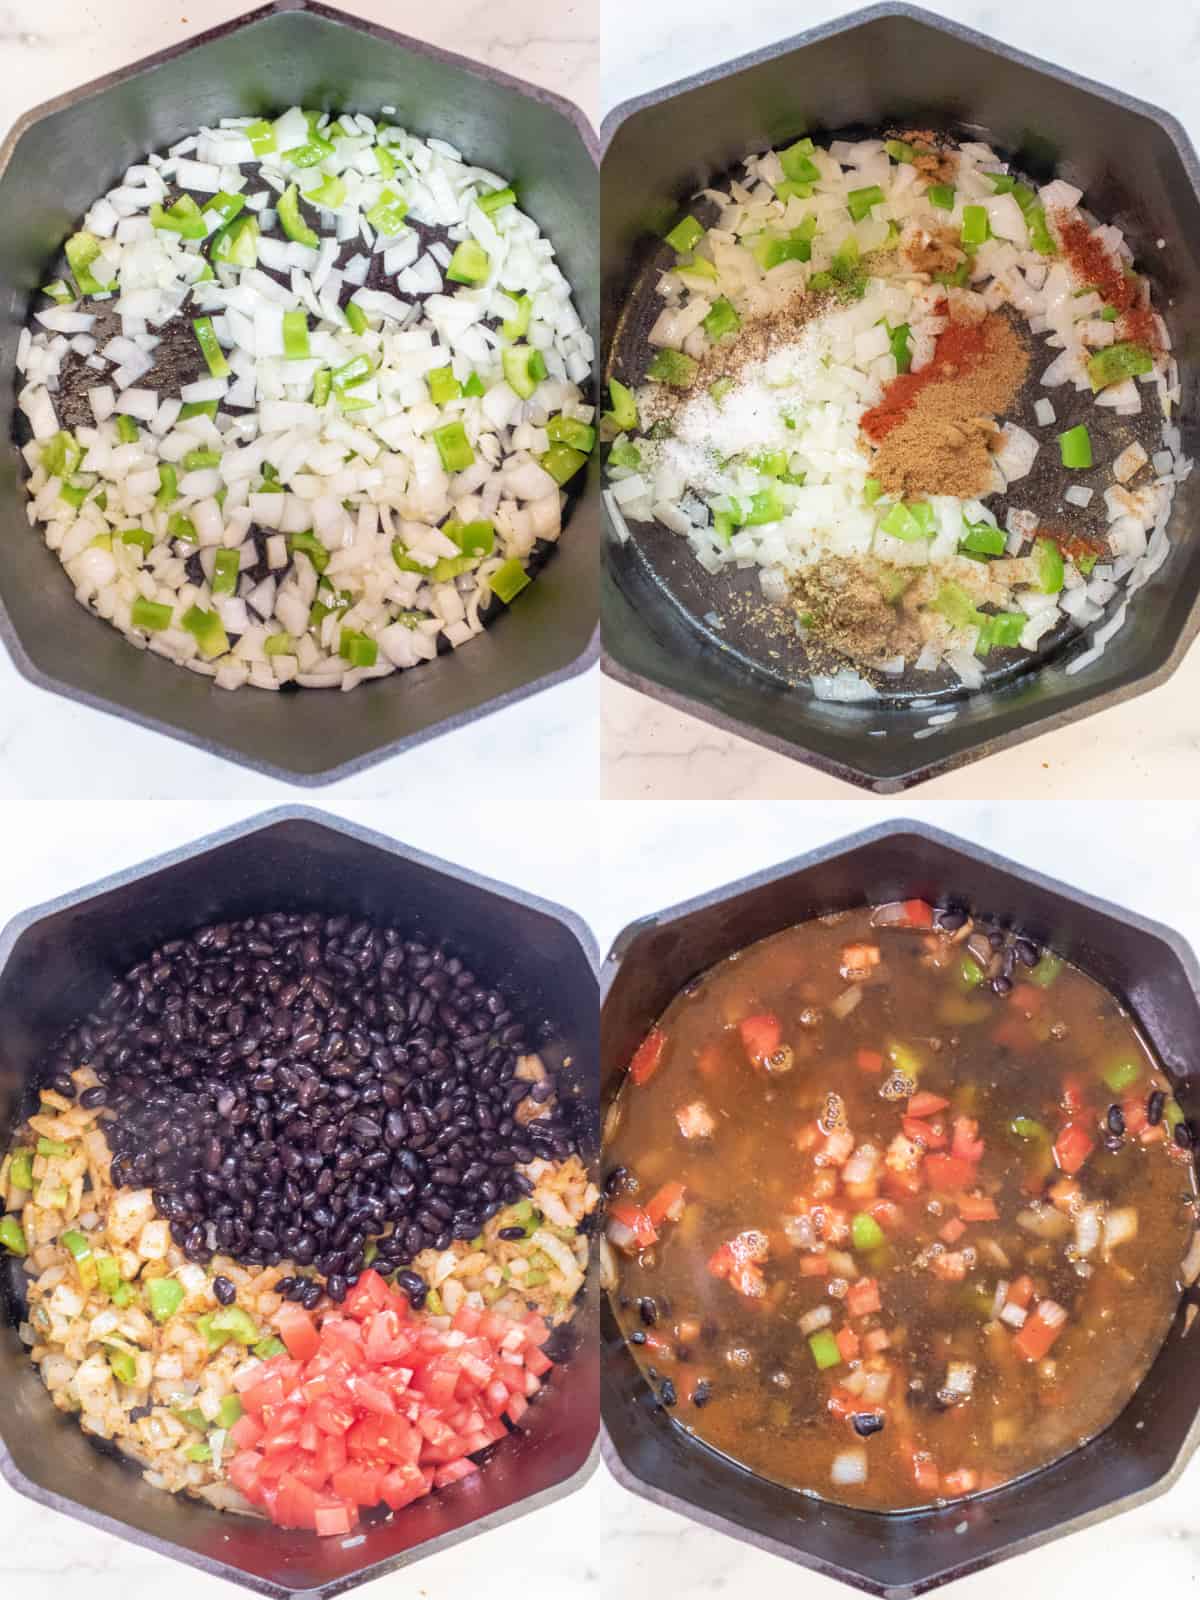 4 pictures of dutch ovens. One with onion and peppers, the next with spices, then with beans and tomatoes, and then with stock.